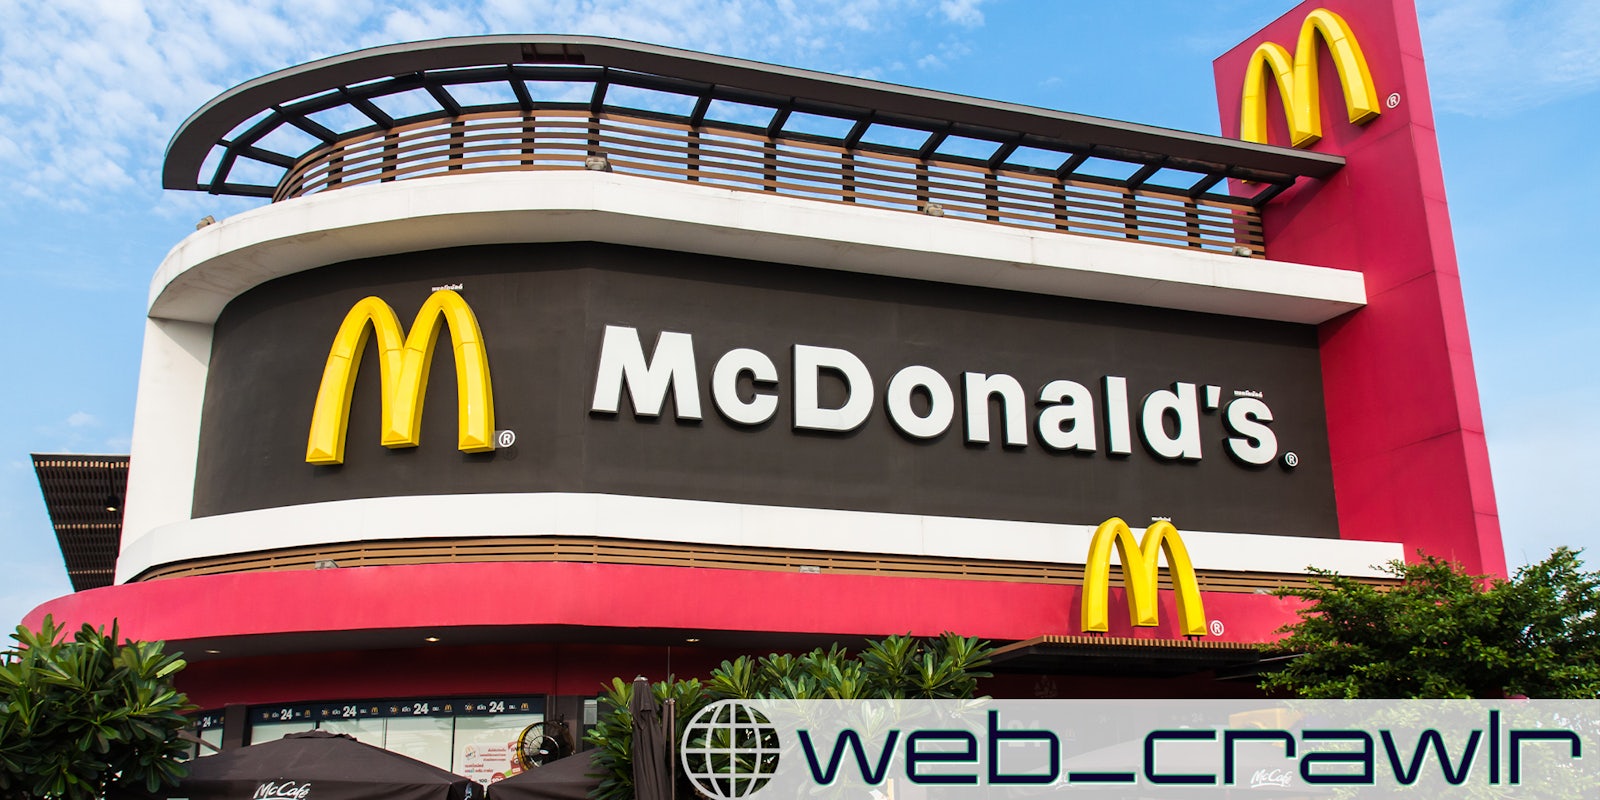 Finding 'GPS trackers' on your McDonald's order